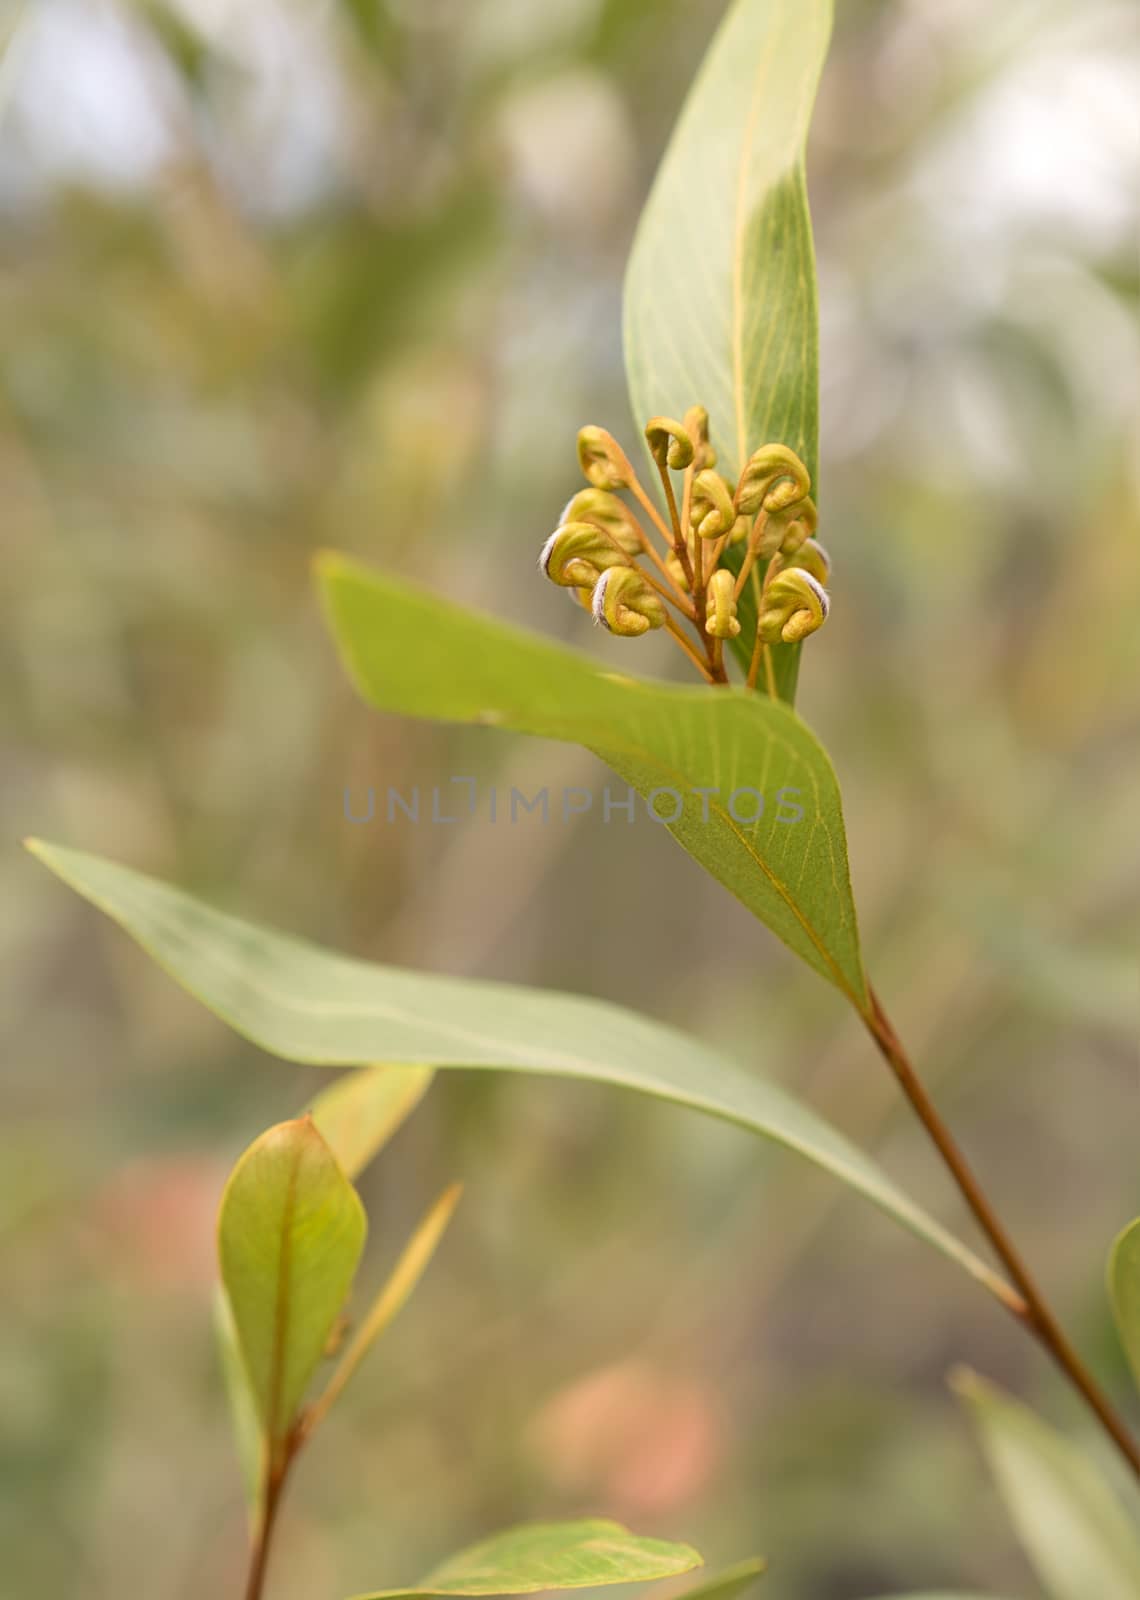 Australian native Grevillea flower buds first stage of growth with spider flower starting to emerge